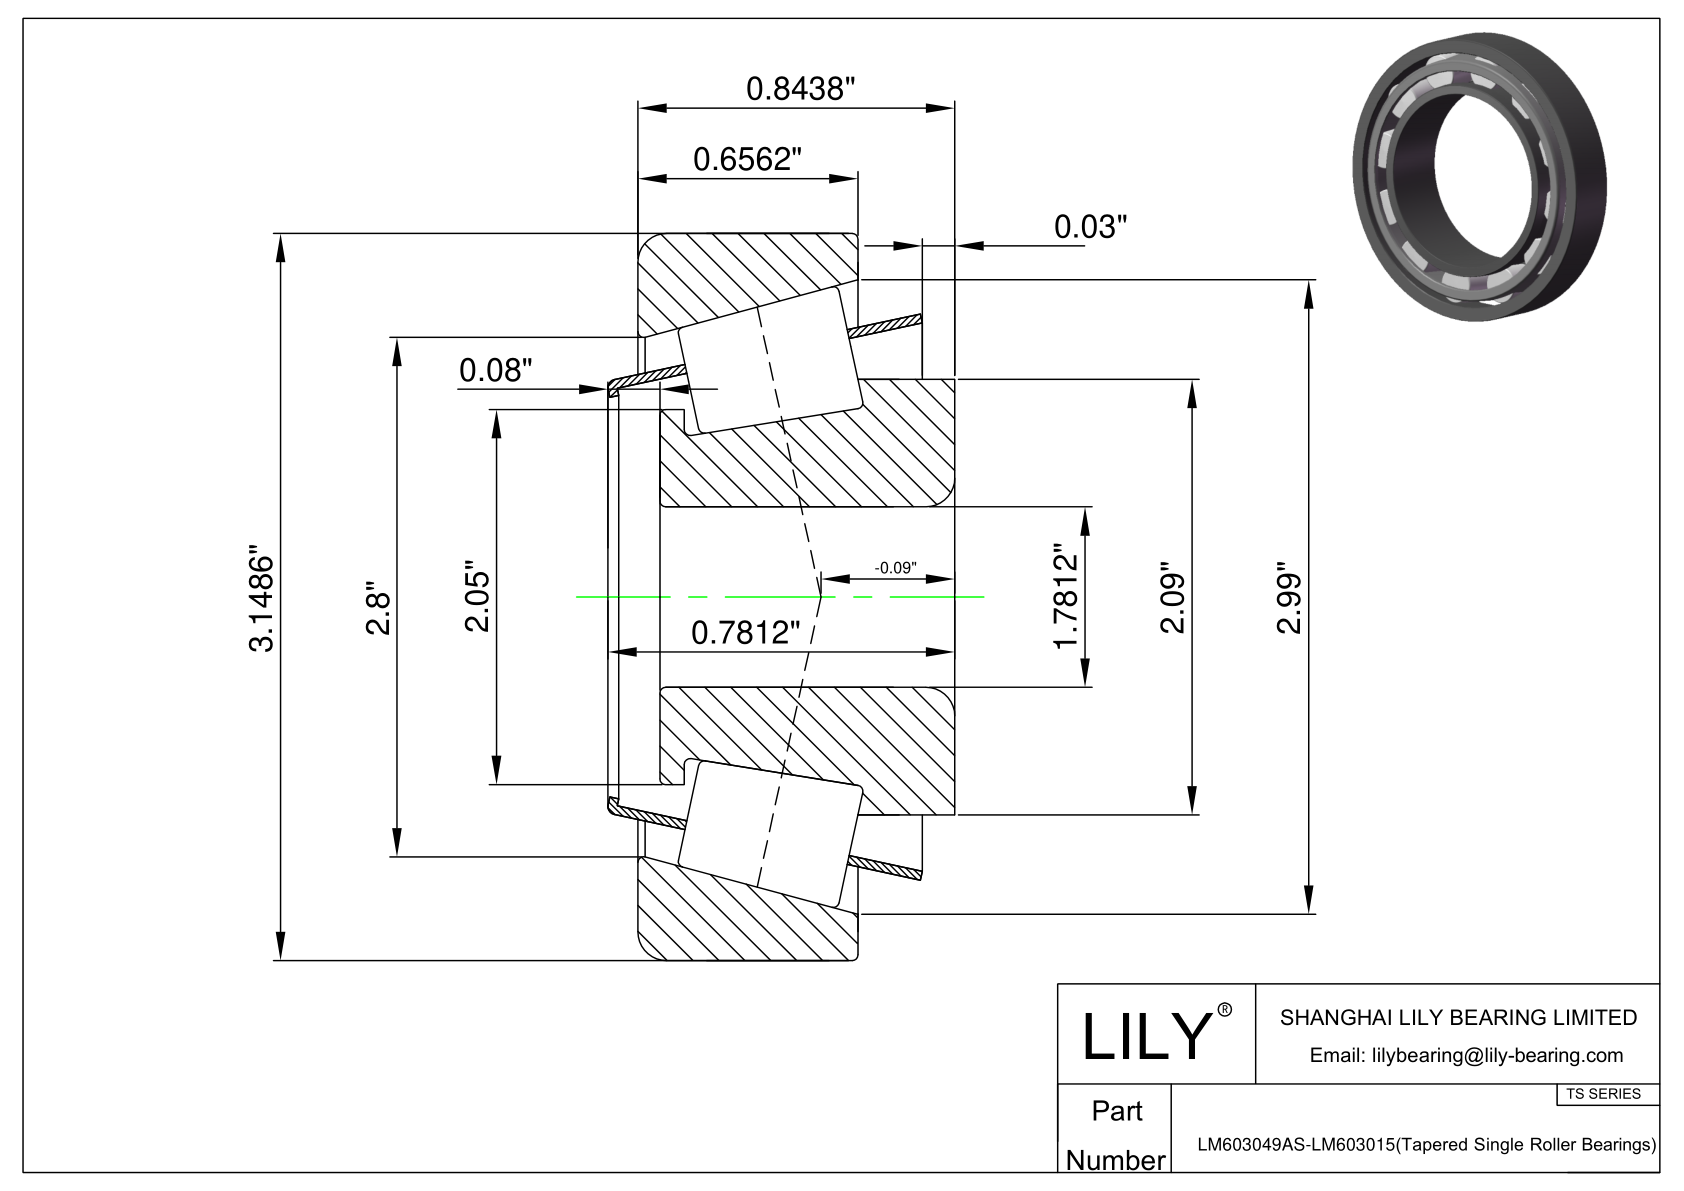 LM603049AS-LM603015 TS (Tapered Single Roller Bearings) (Imperial) cad drawing